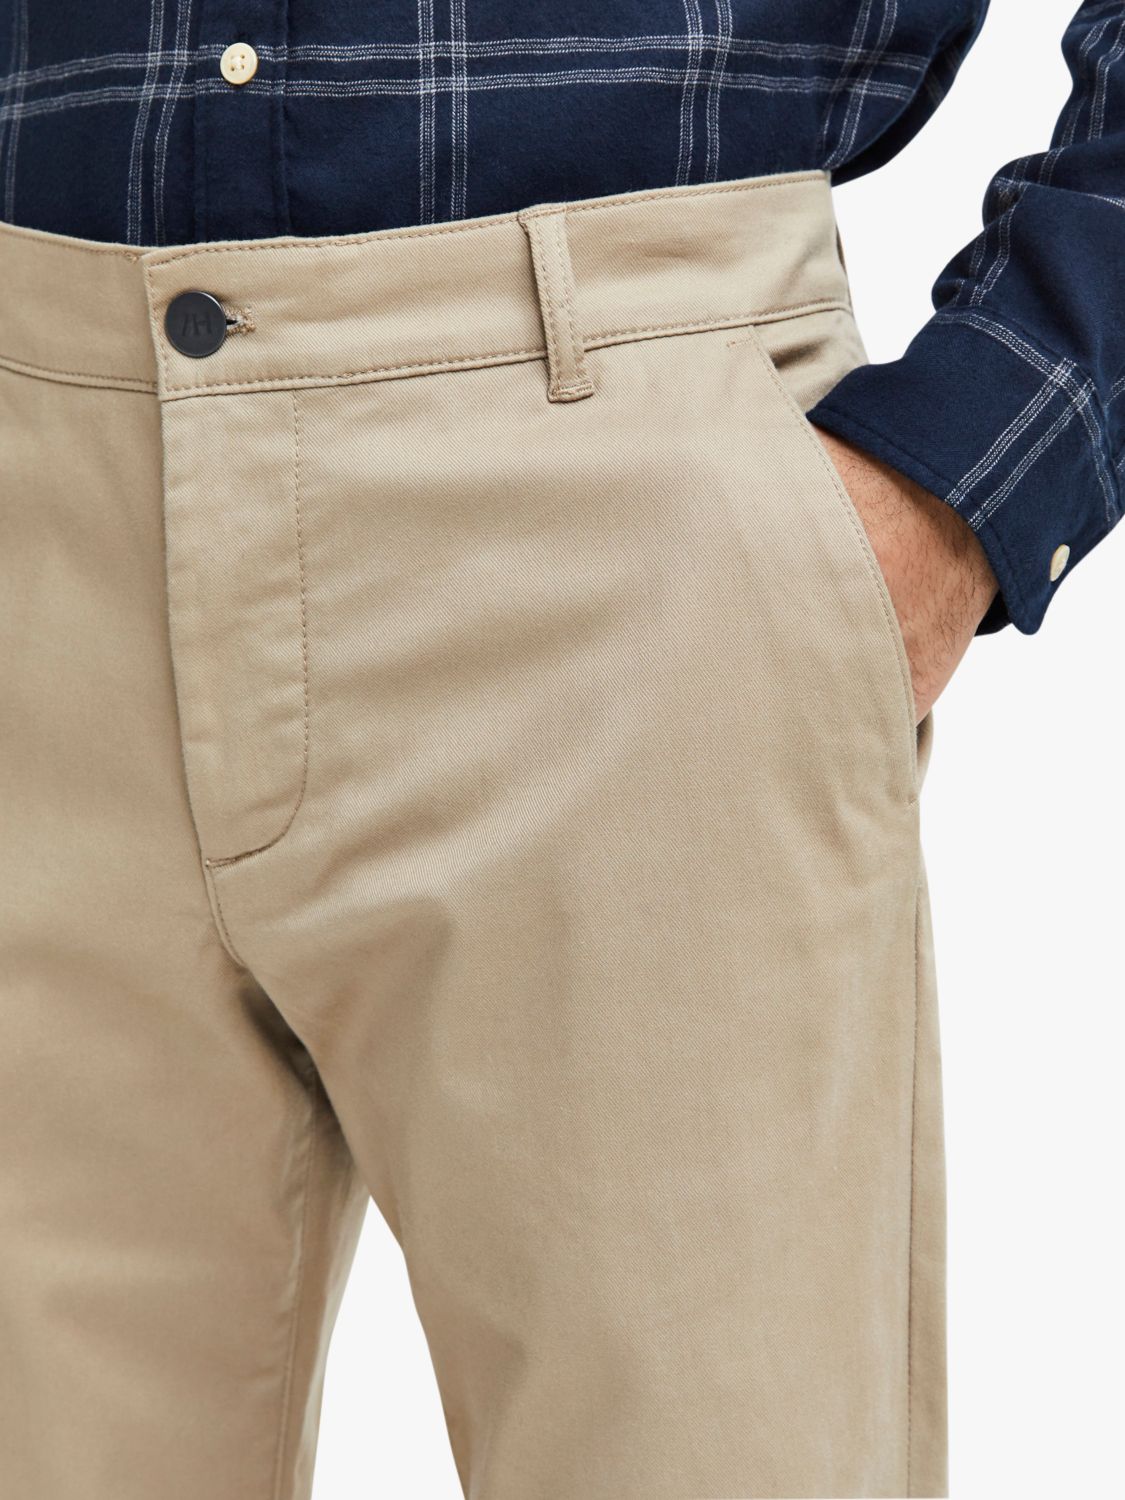 at SELECTED Chinos, & John HOMME Partners Standard Lewis Chinchilla